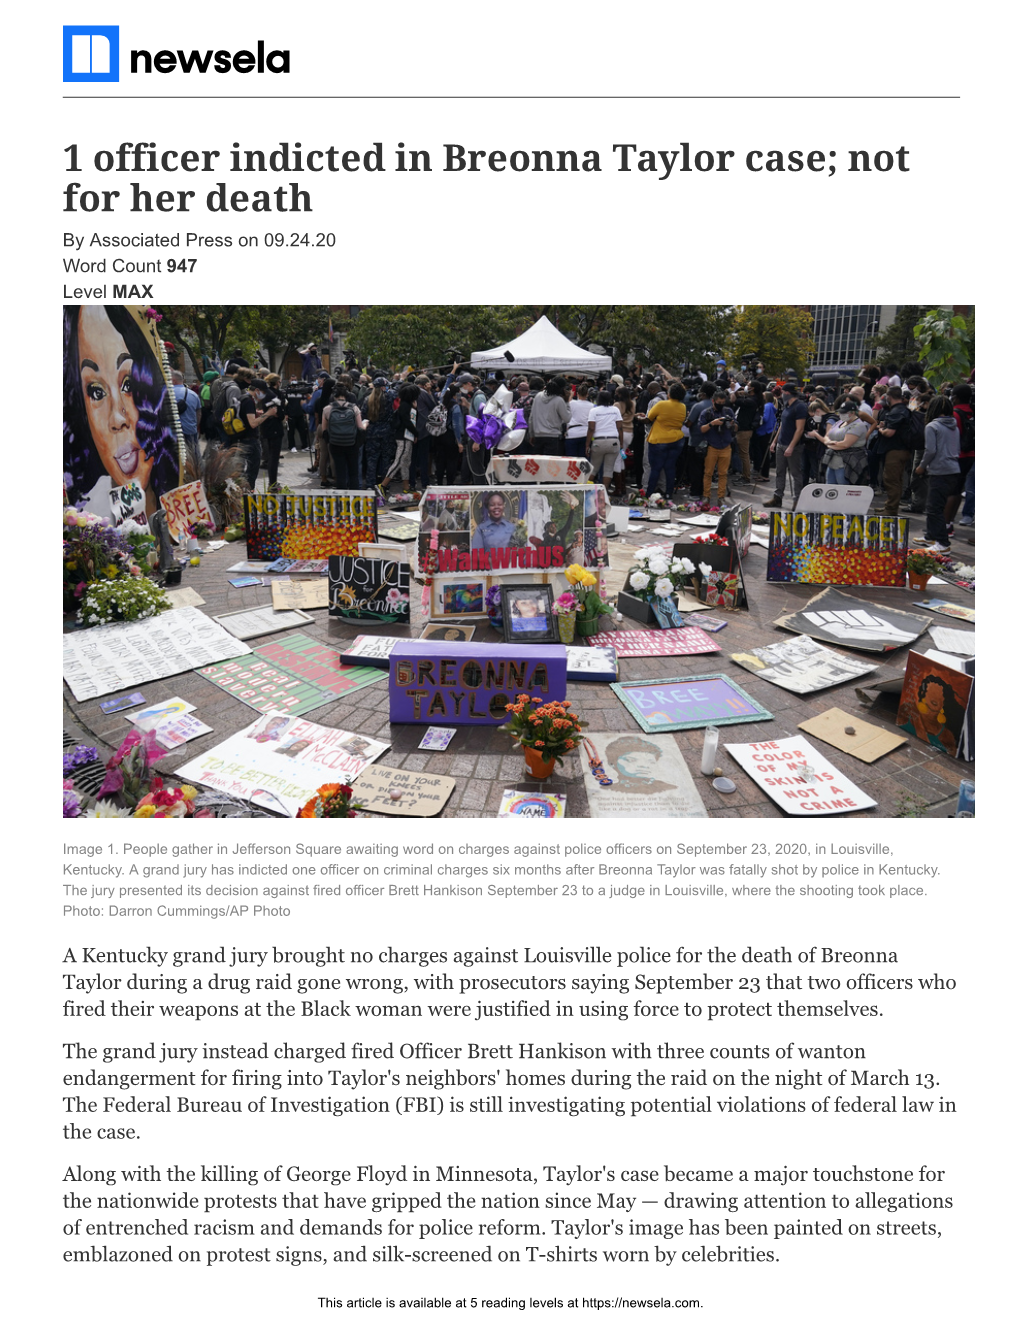 1 Officer Indicted in Breonna Taylor Case; Not for Her Death by Associated Press on 09.24.20 Word Count 947 Level MAX